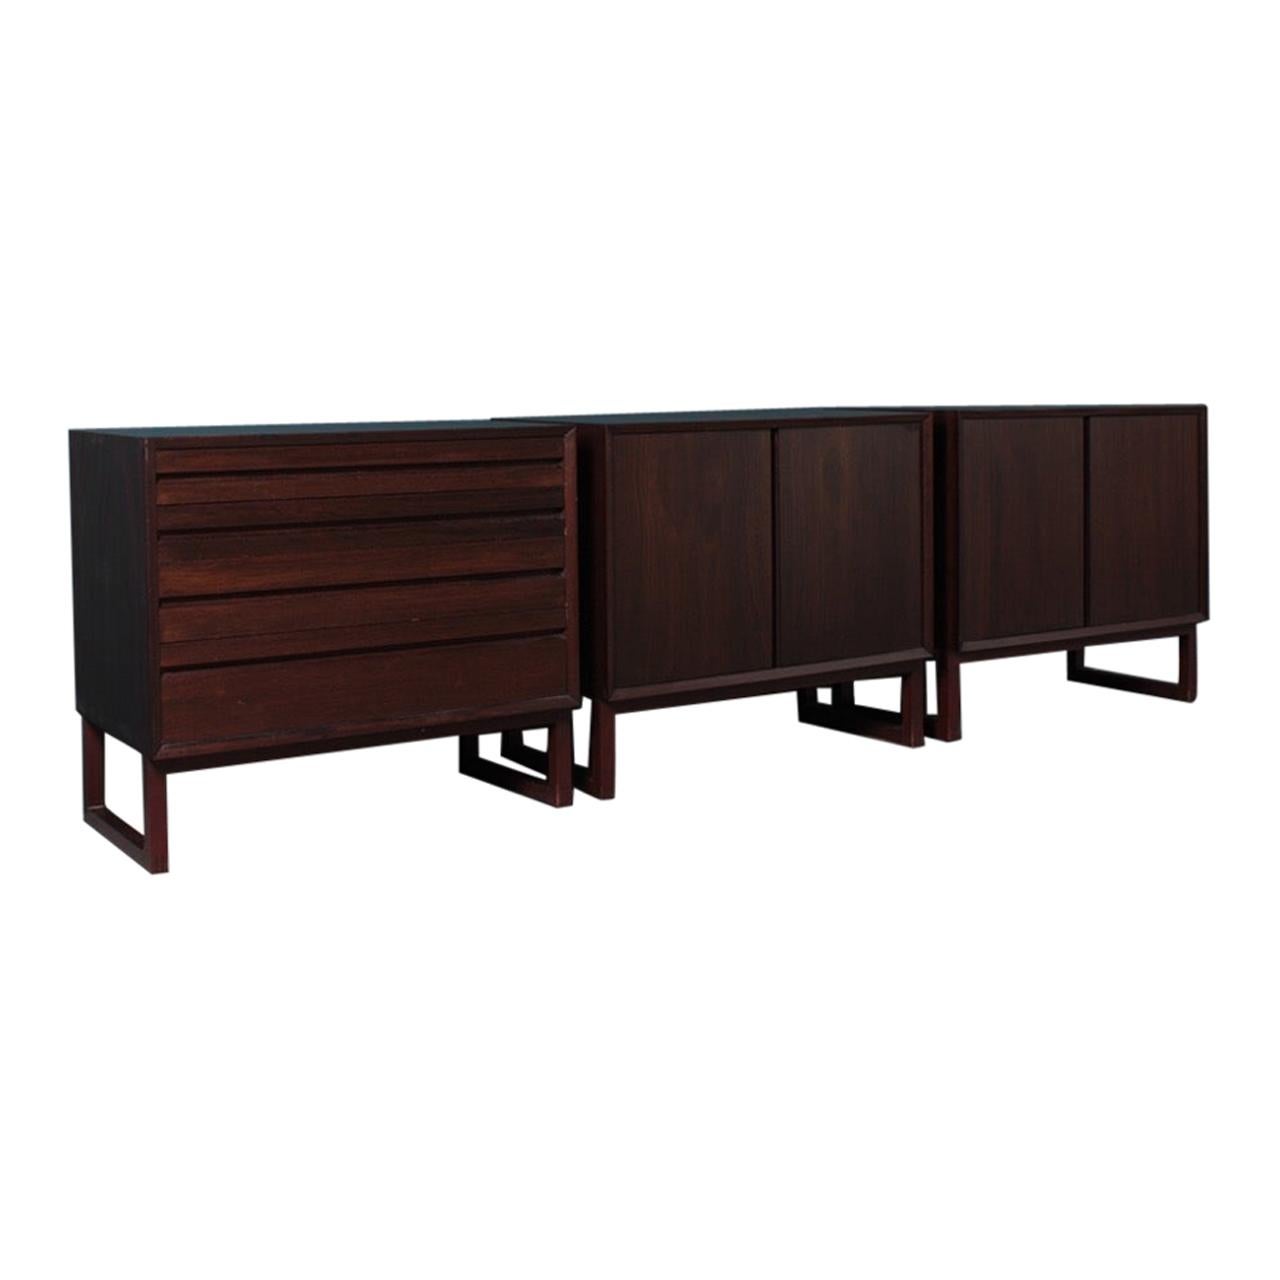 Midcentury Commode and Two Cabinets in Mahogany by Cado, Made in Denmark, 1960s